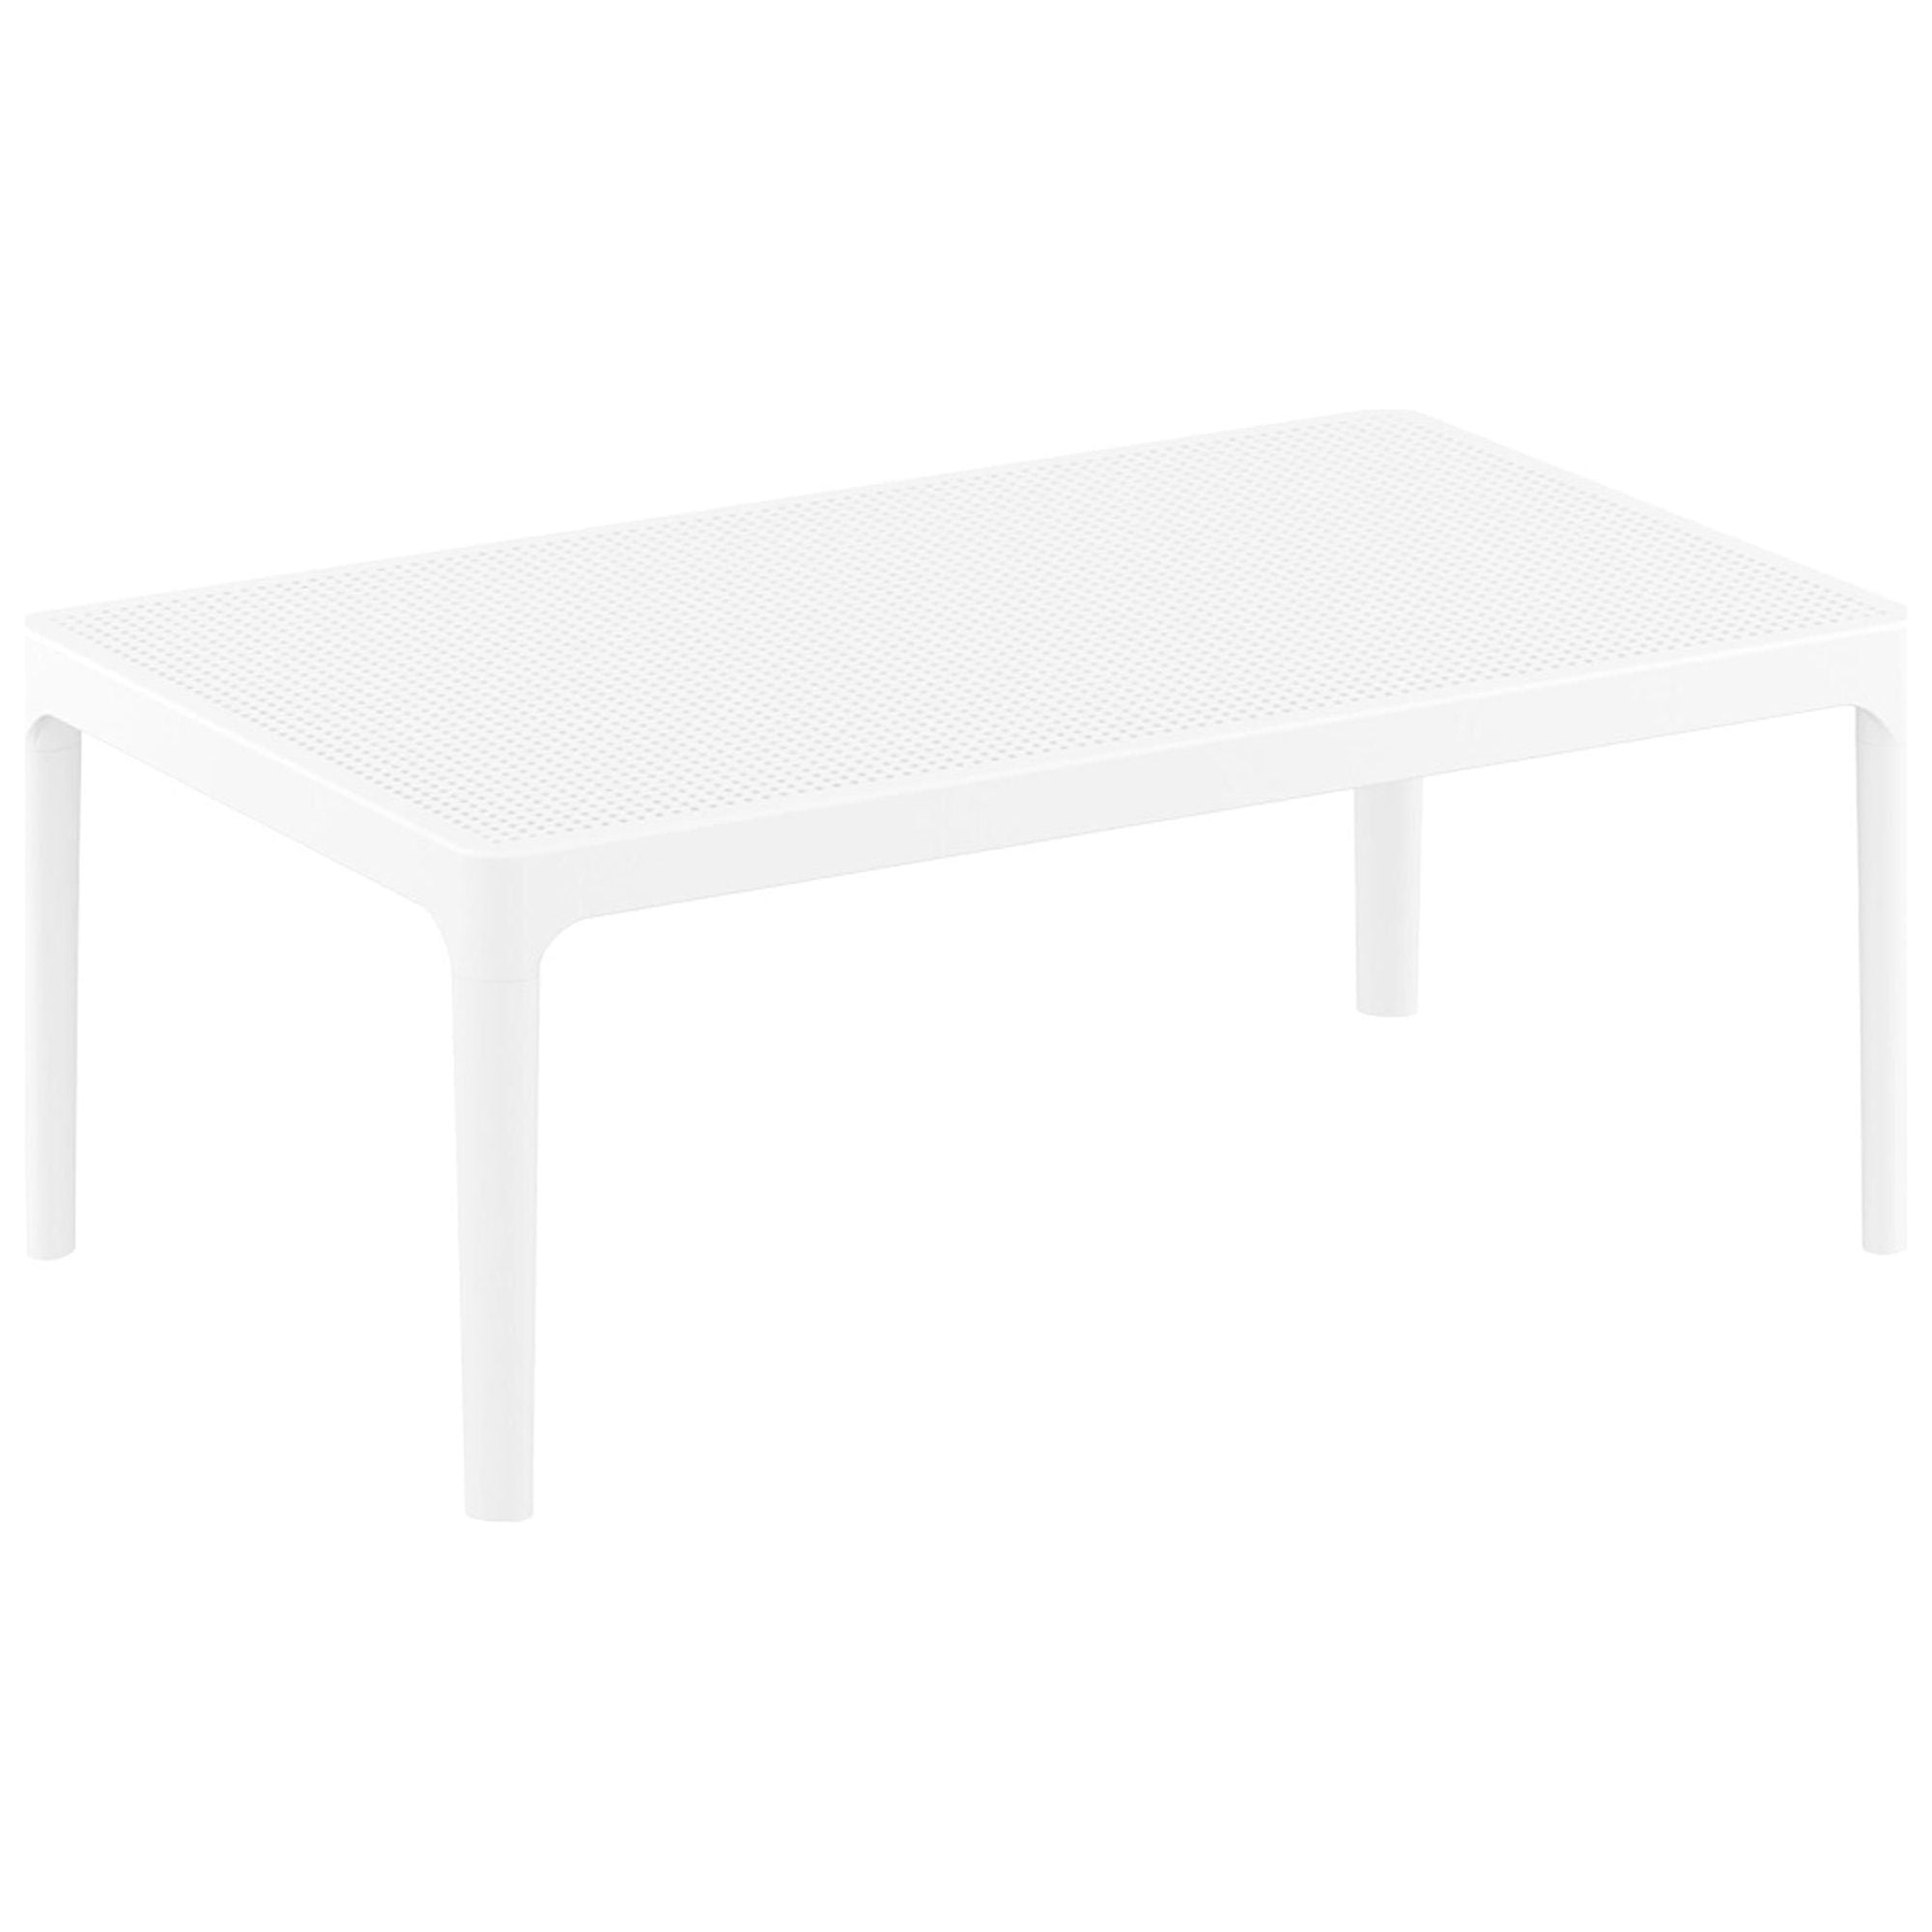 Garbar Sky coffee table indoors, outdoor 100x60 white